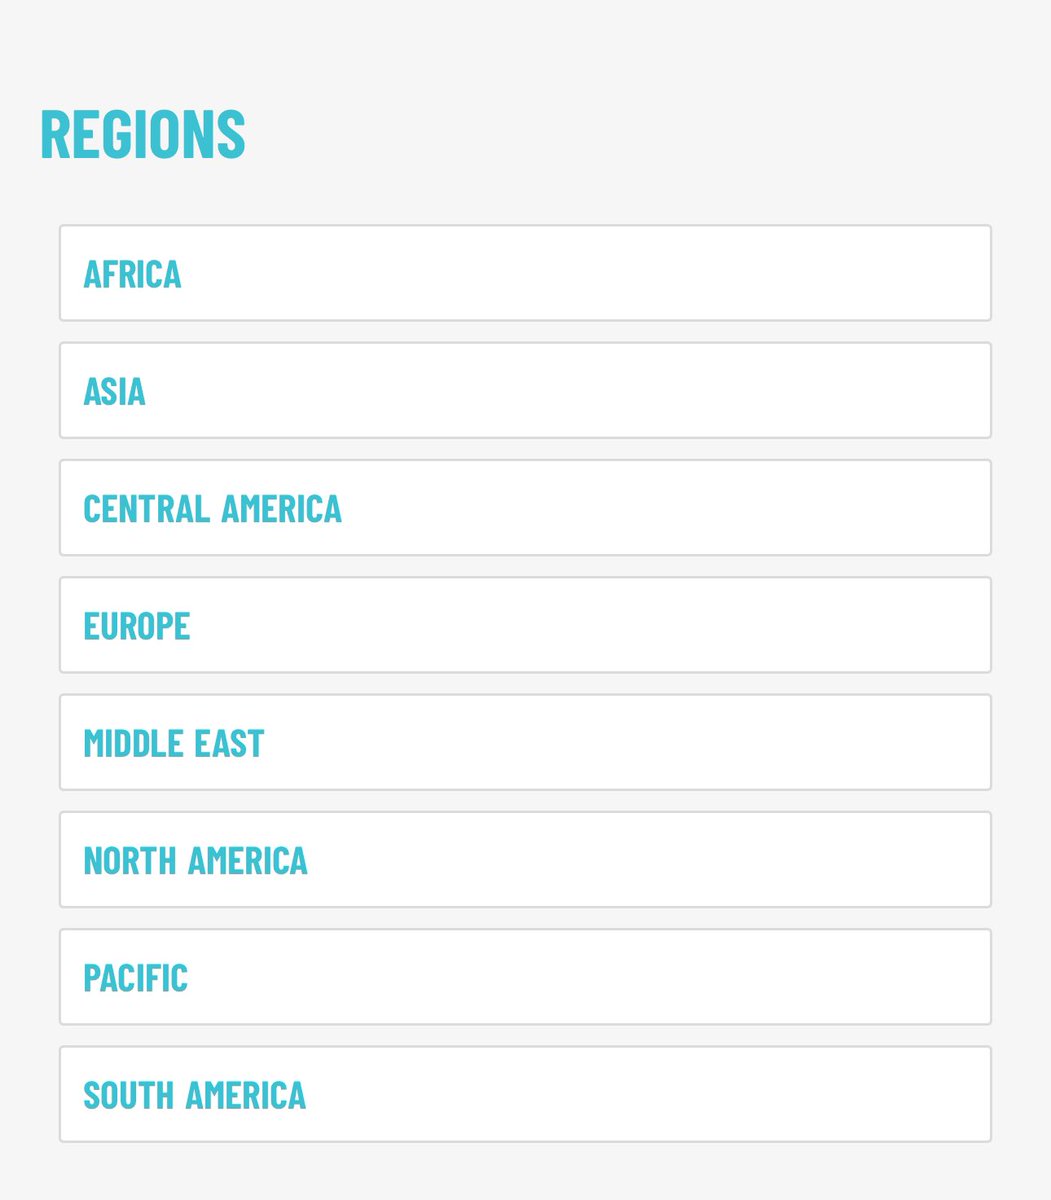 I can see @helium_mobile going worldwide 🛜🌎🛜 with USA / Mexico / Canada being region VR1 and the rest of the world broken down by regional areas and each region having its own token supply of 230 billion…meaning North America is VR1 and Asia would be VR2 and so on to achieve…